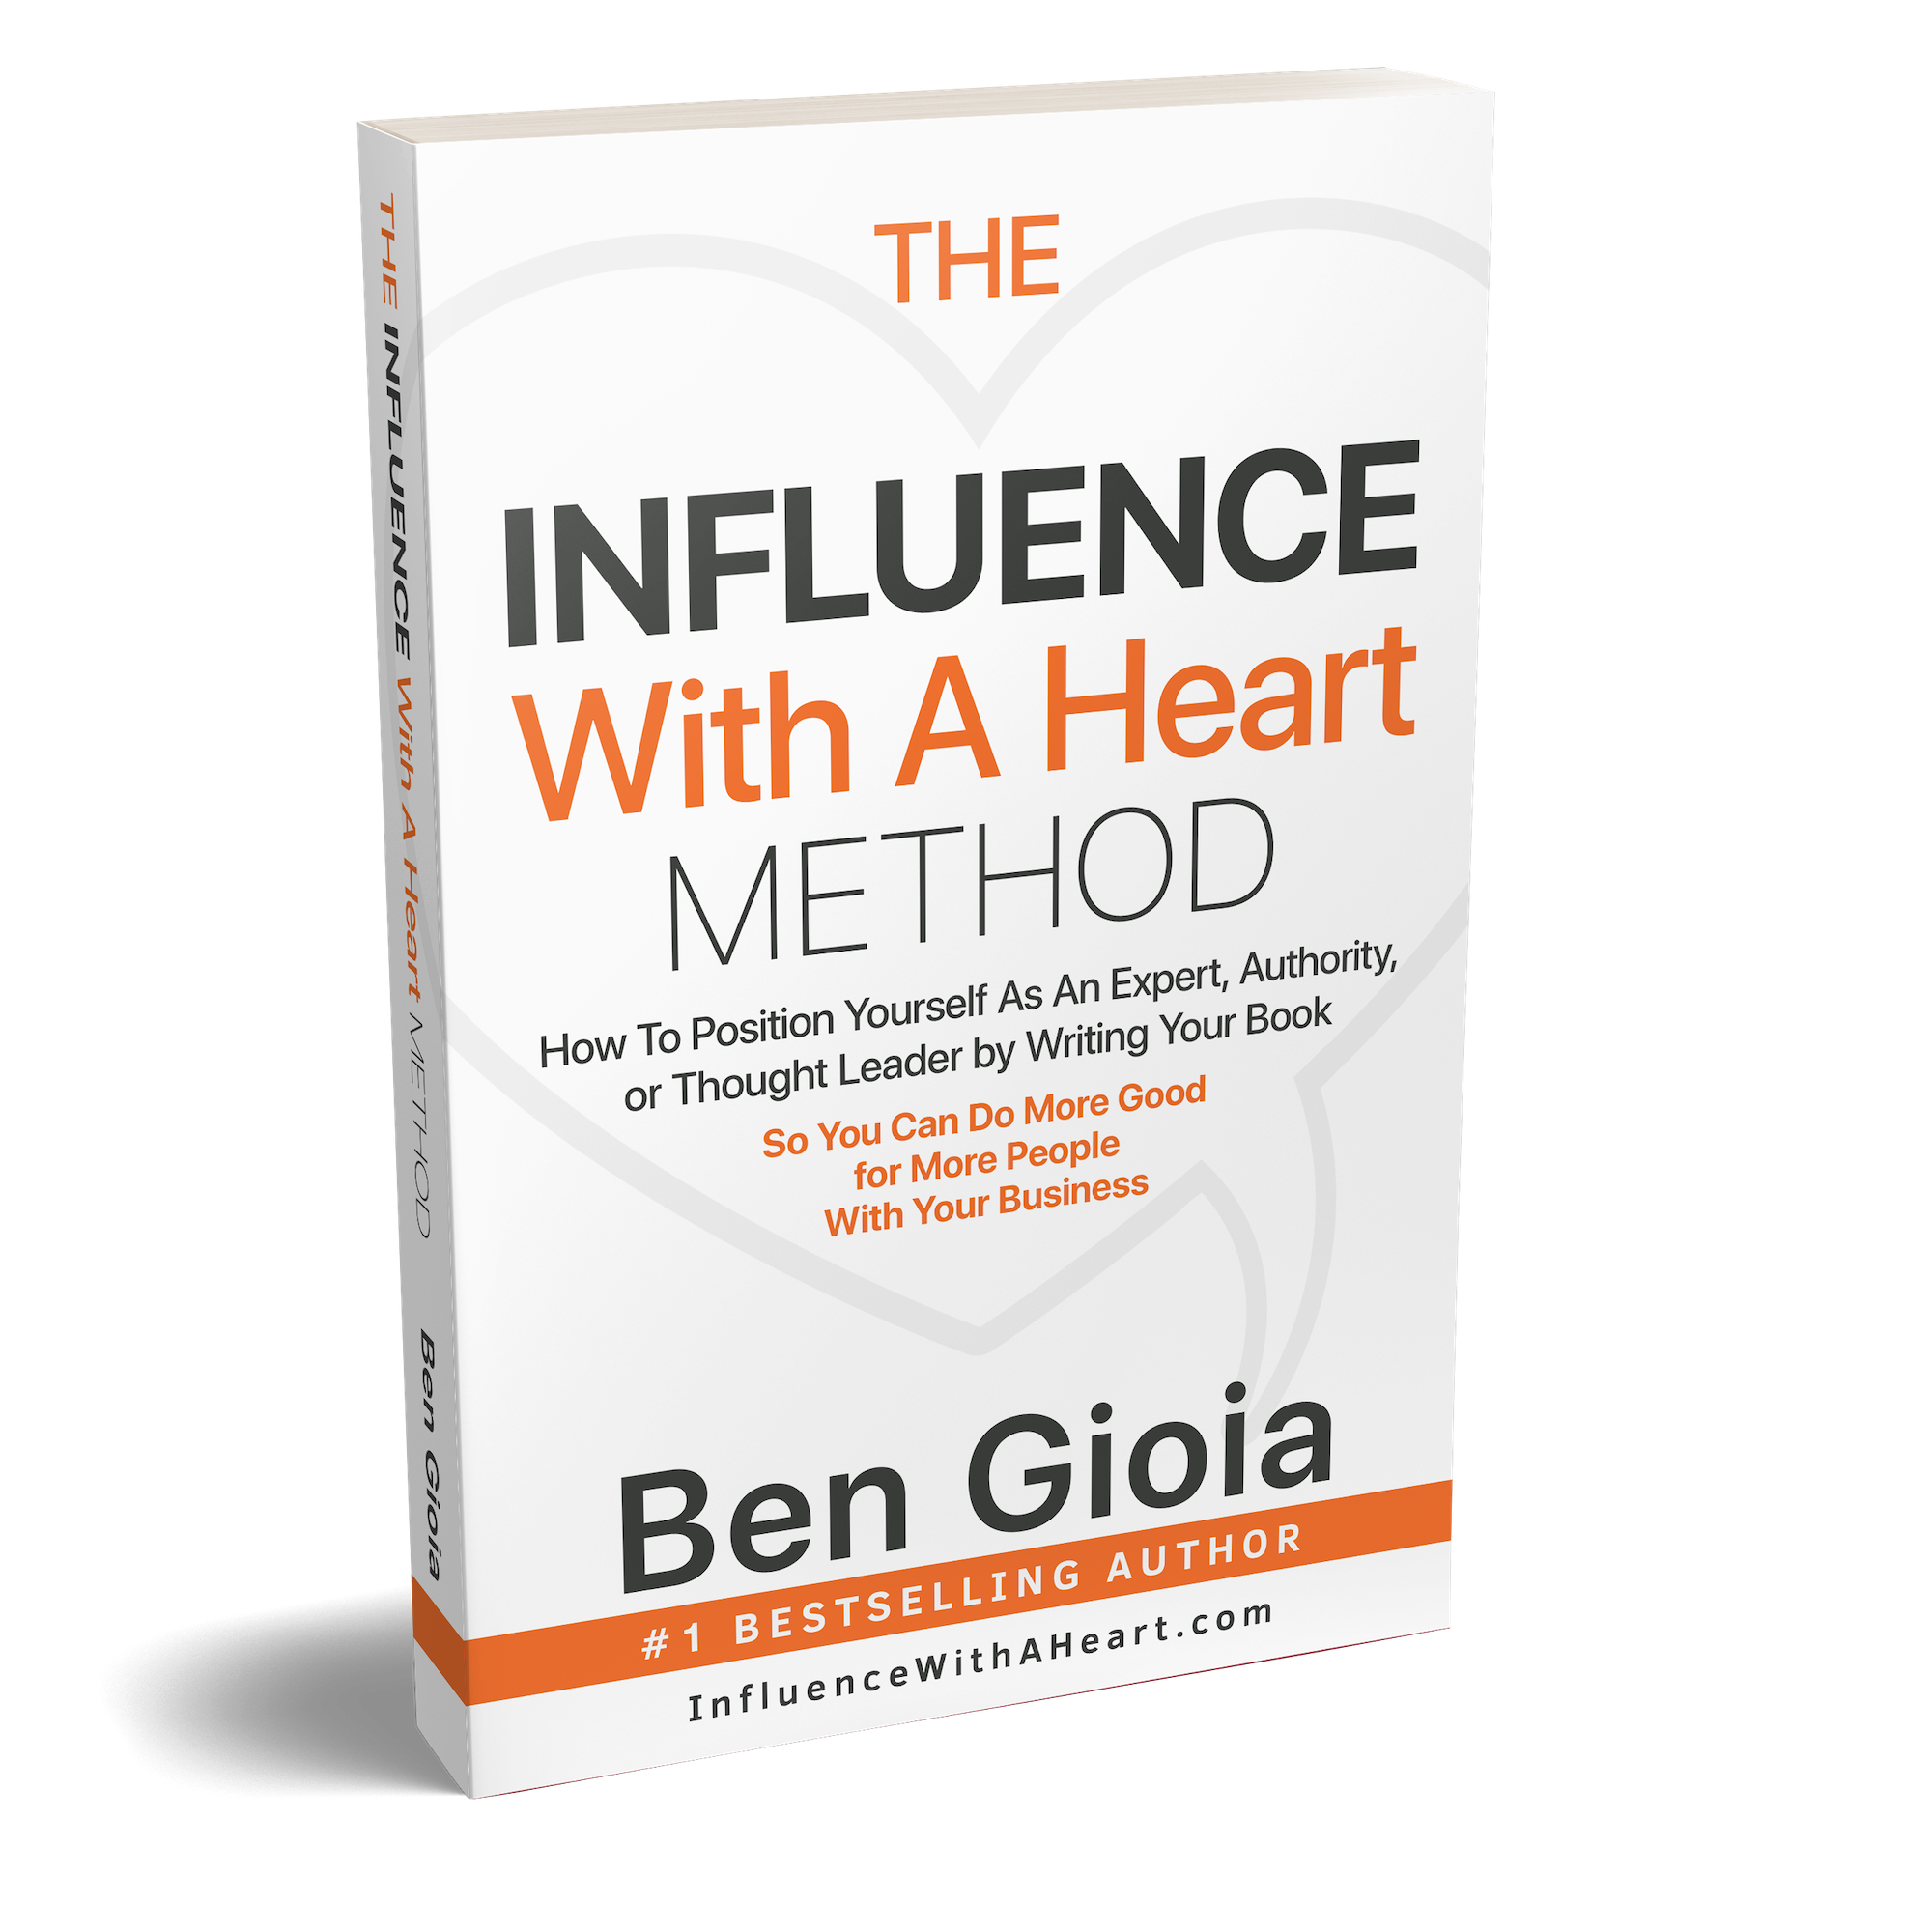 Influence with a Heart Method book